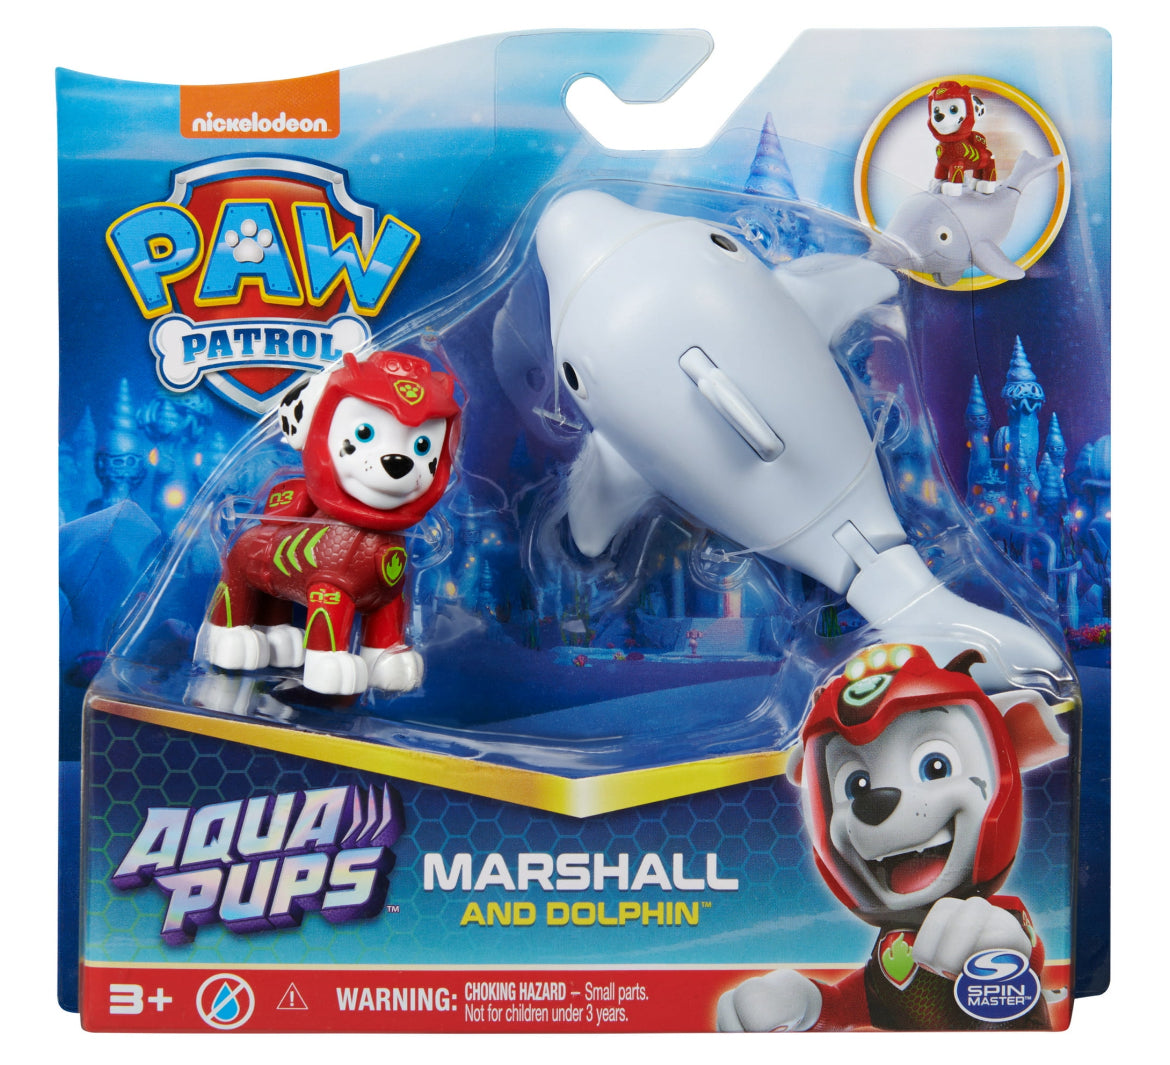 PAW Patrol, Aqua Pups Marshall and Dolphin Action Figures